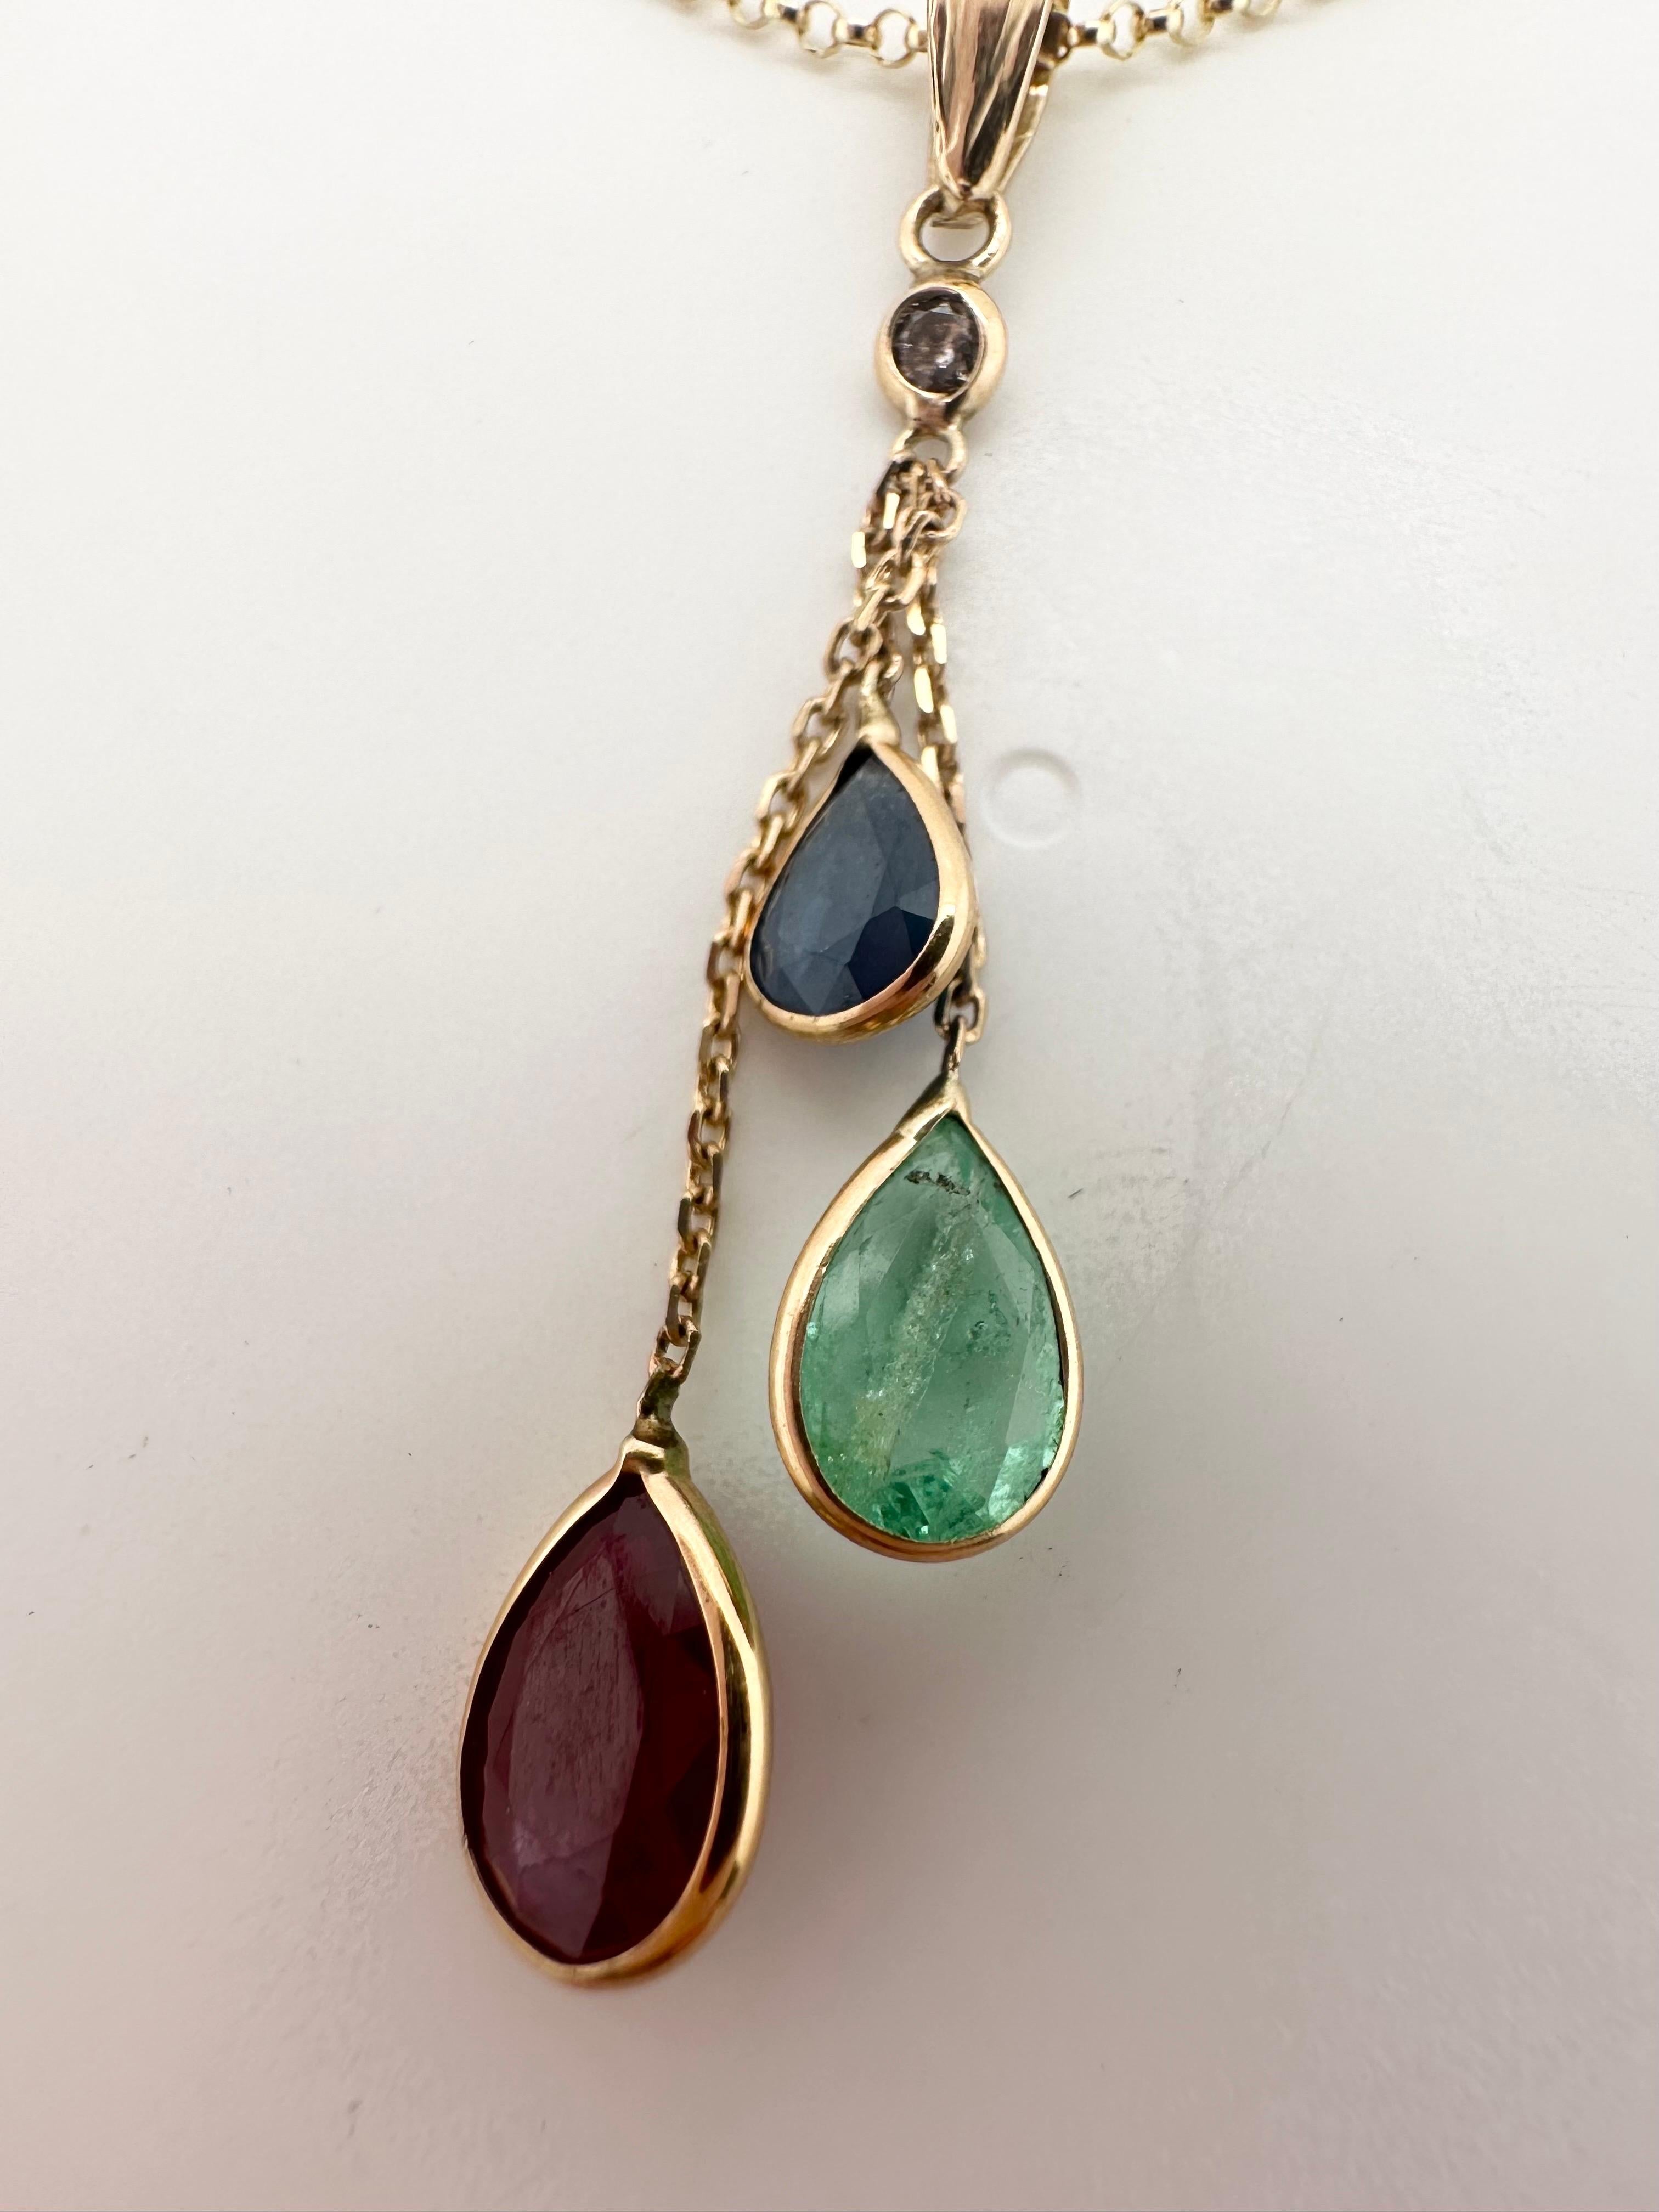 Dangling pendant necklace made with diamond, sapphire, ruby and emerald 100% natural gemstones in 14KT yellow gold, chain is 18